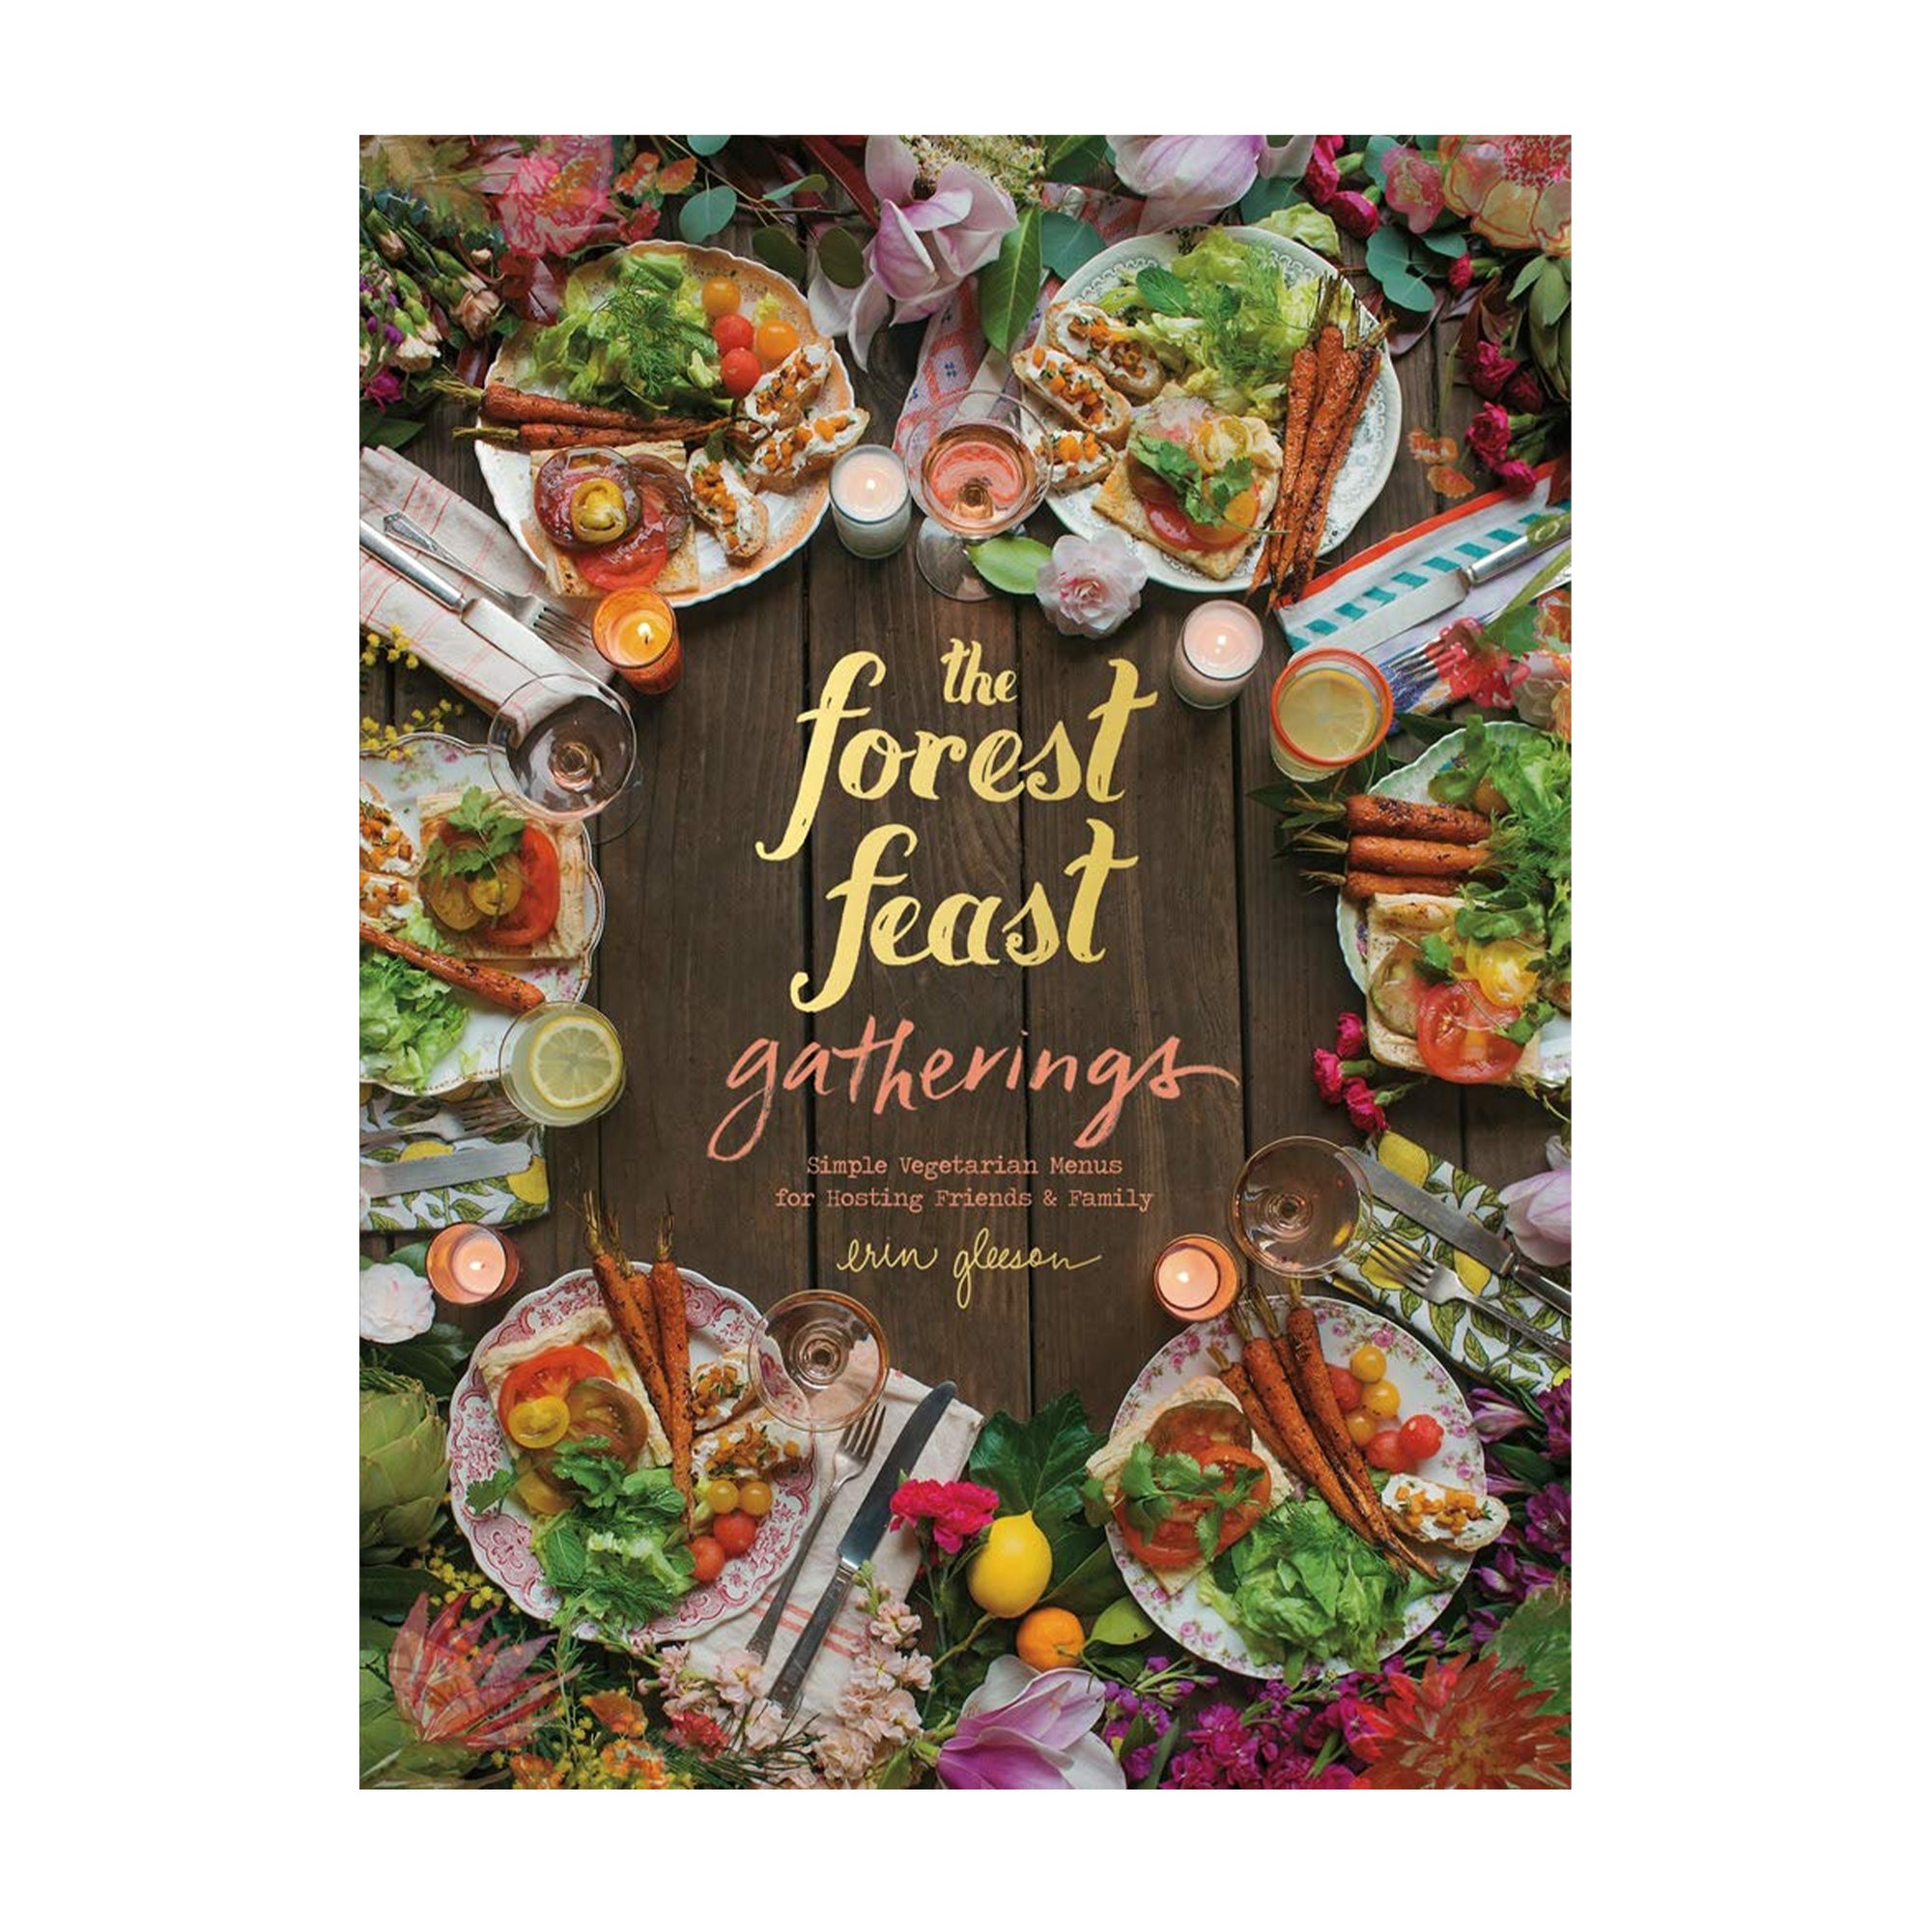 The Forest Feast Gatherings